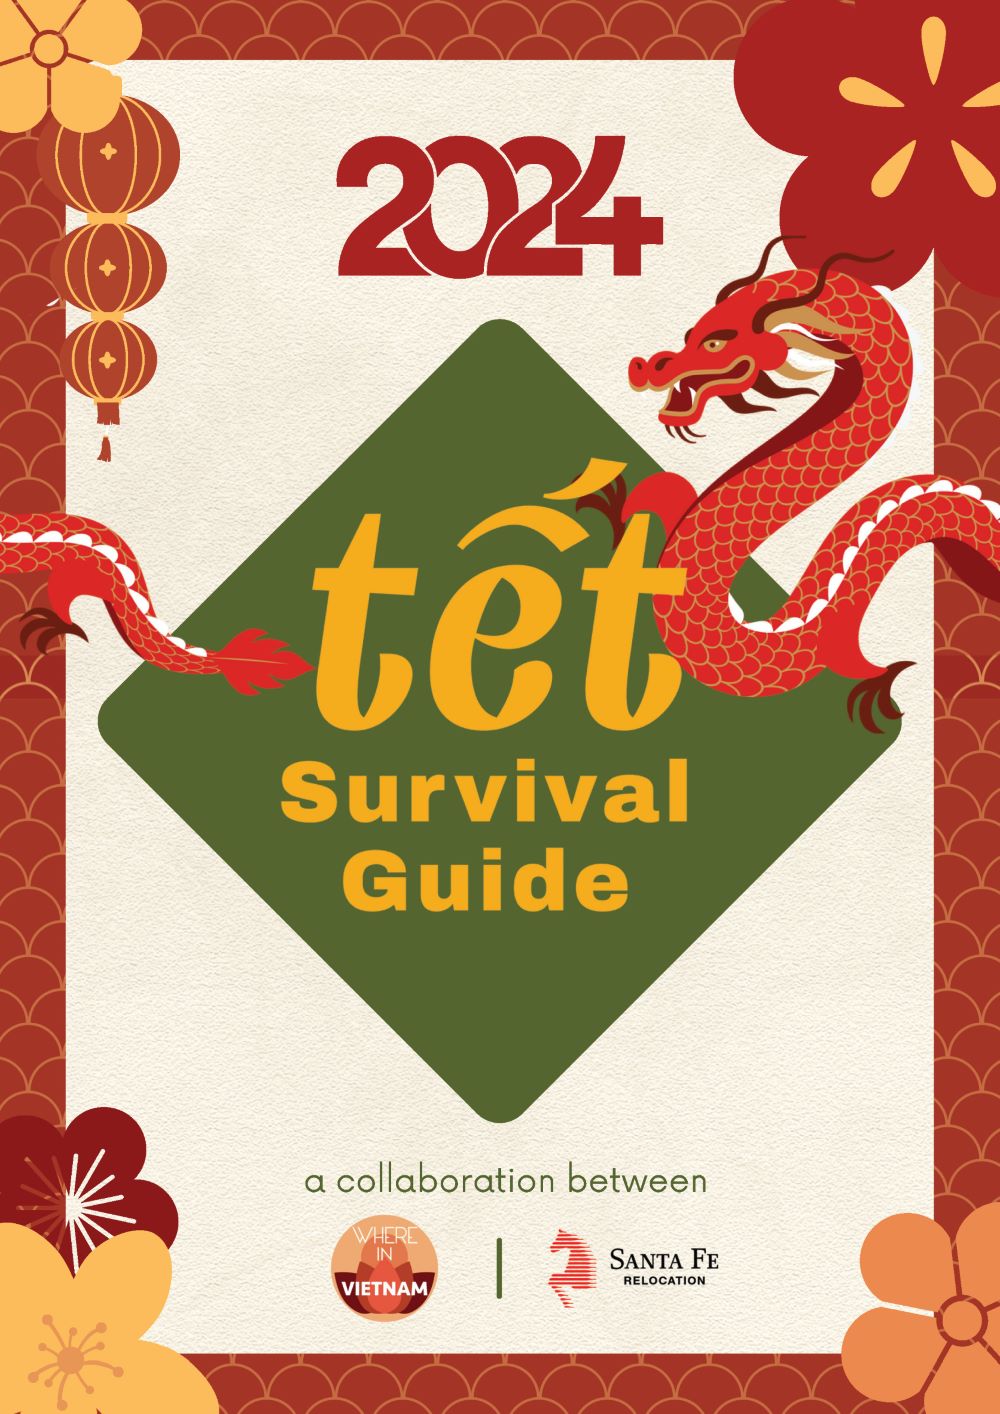 tet survival guide collaboration between where in vietnam santa fe relocation